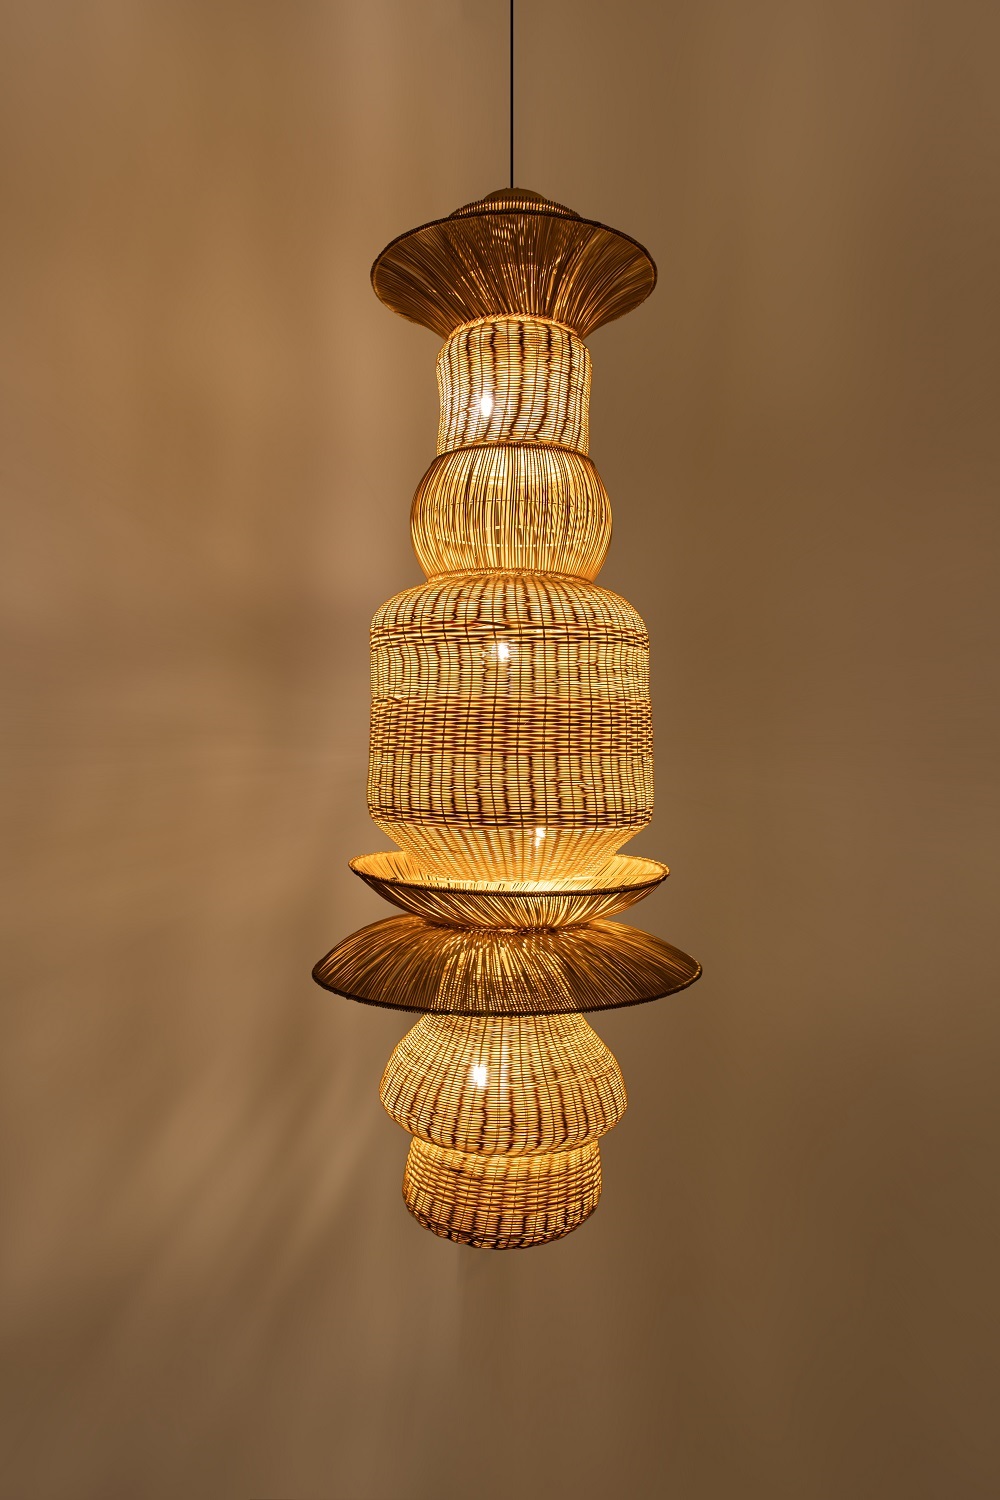 handwoven bespoke lampshades by Omio Atelier & Design